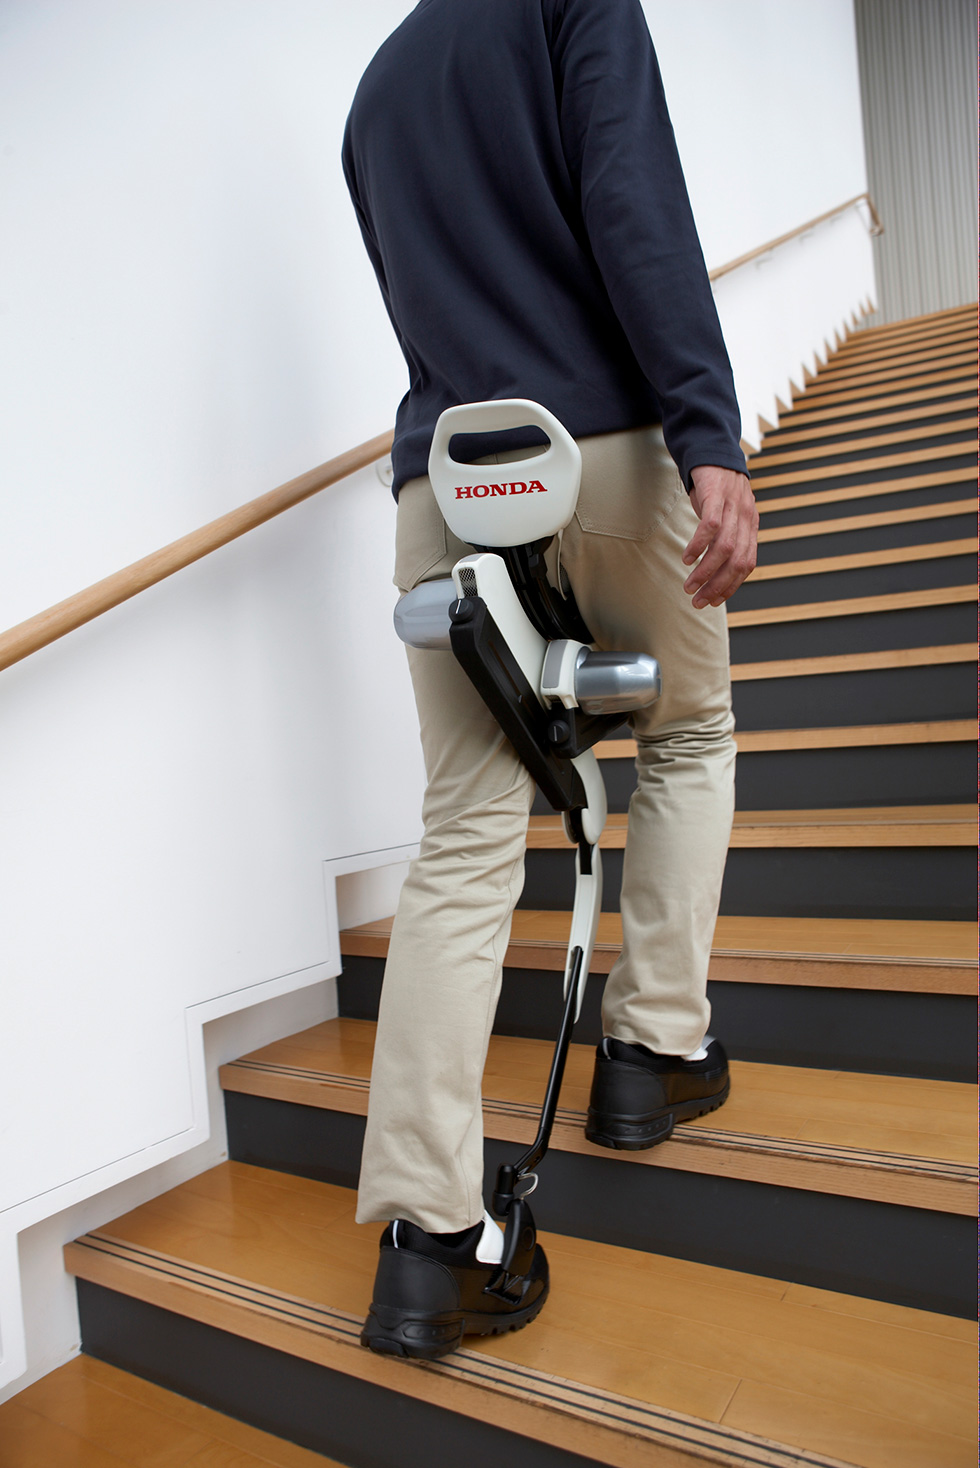 Going up stairs while wearing the device